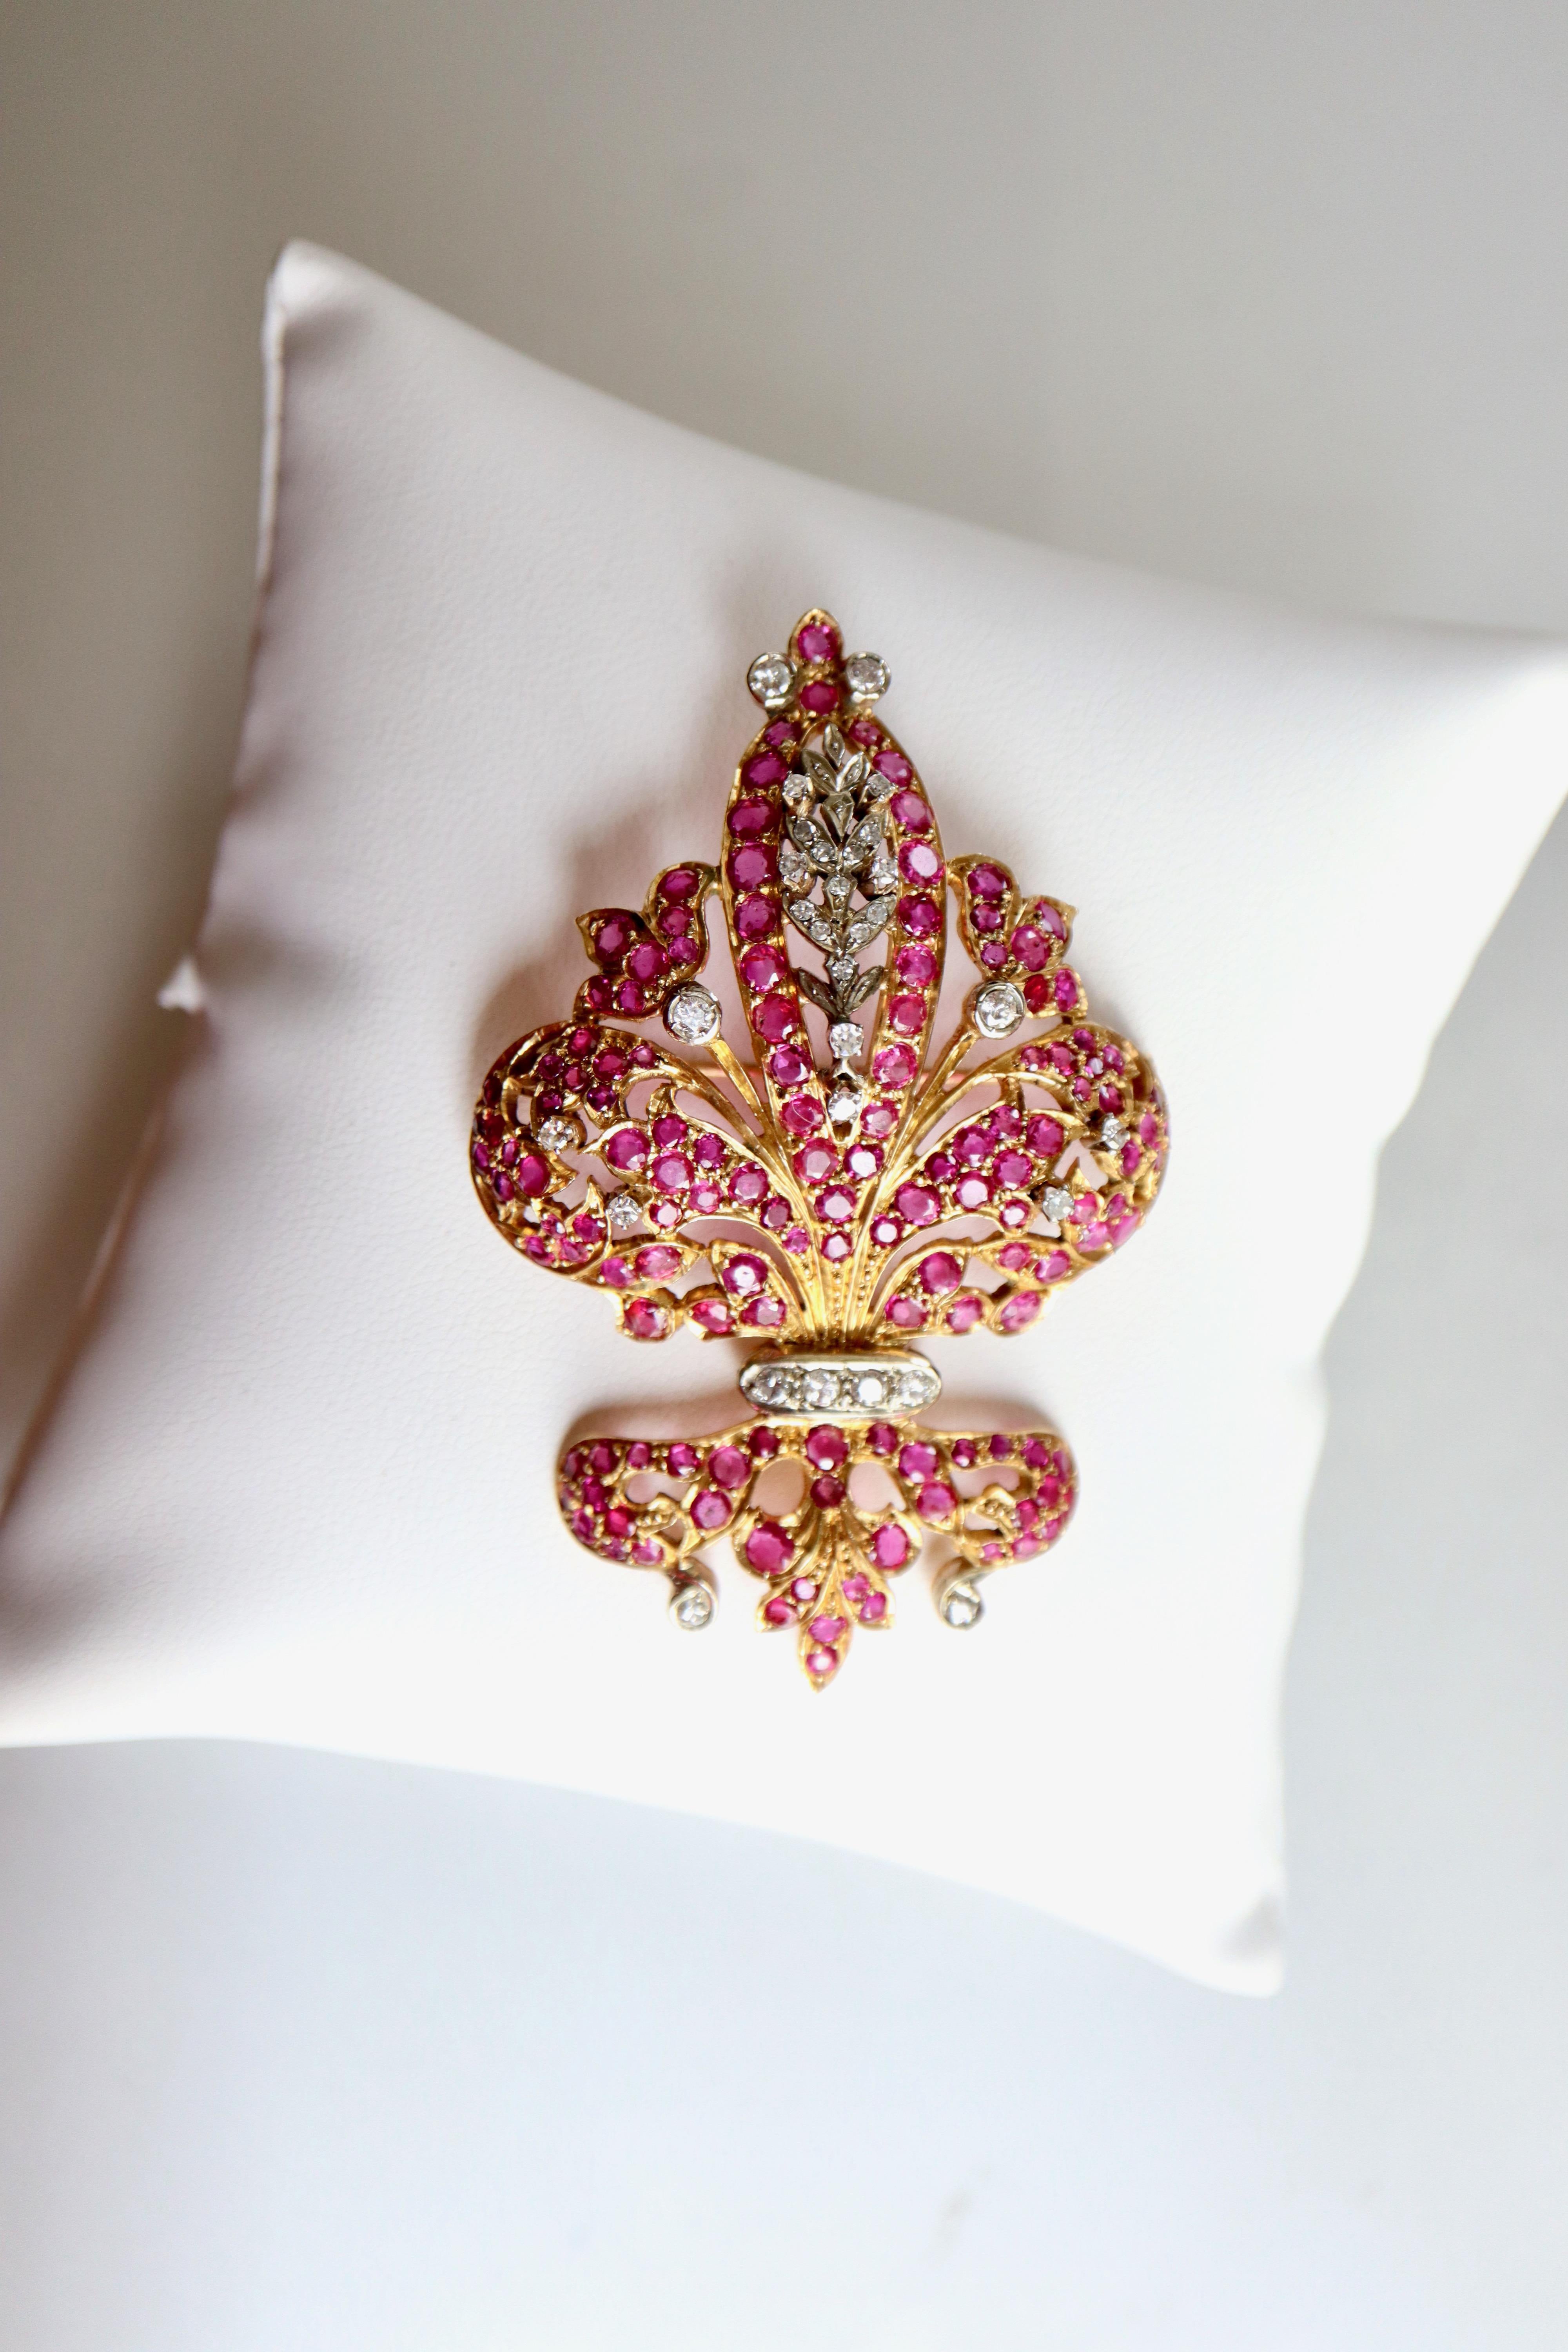 Brooch Heraldic Lily in 18 Kt Gold, Rubies Diamonds For Sale 3